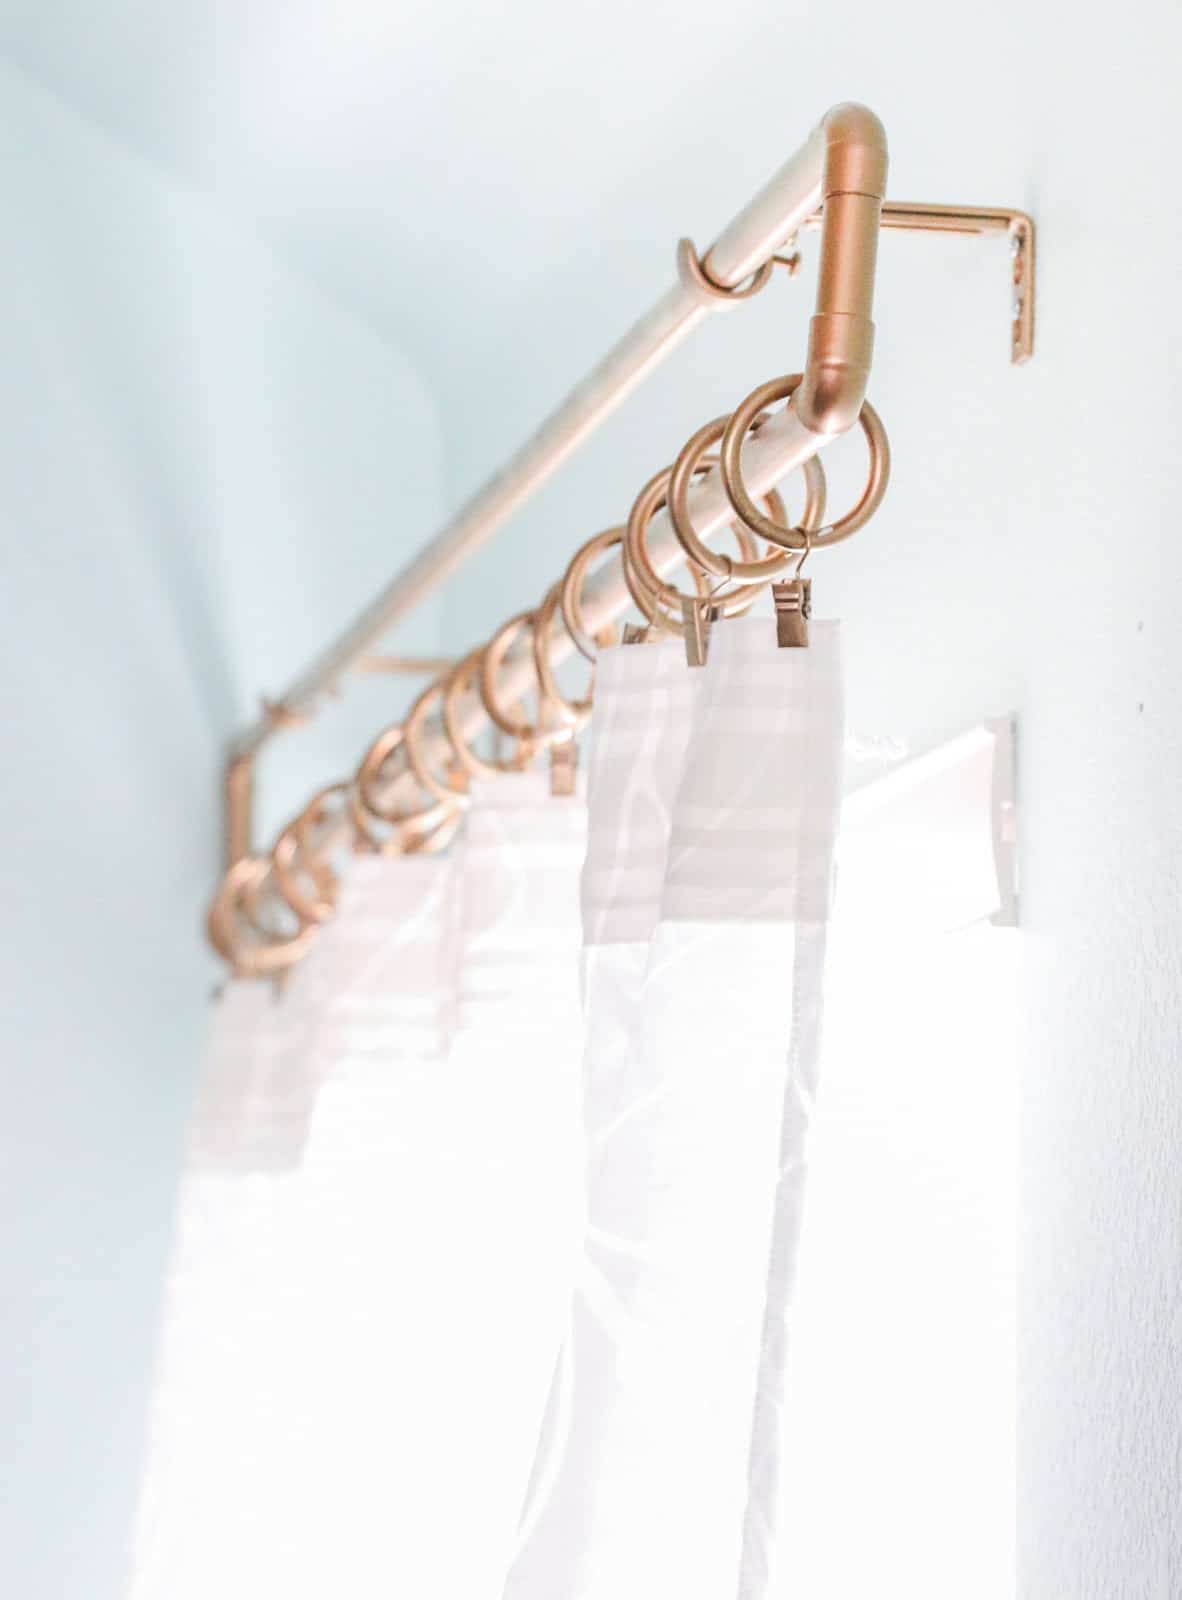 How to Hang Perfect Curtains Using Copper Pipes